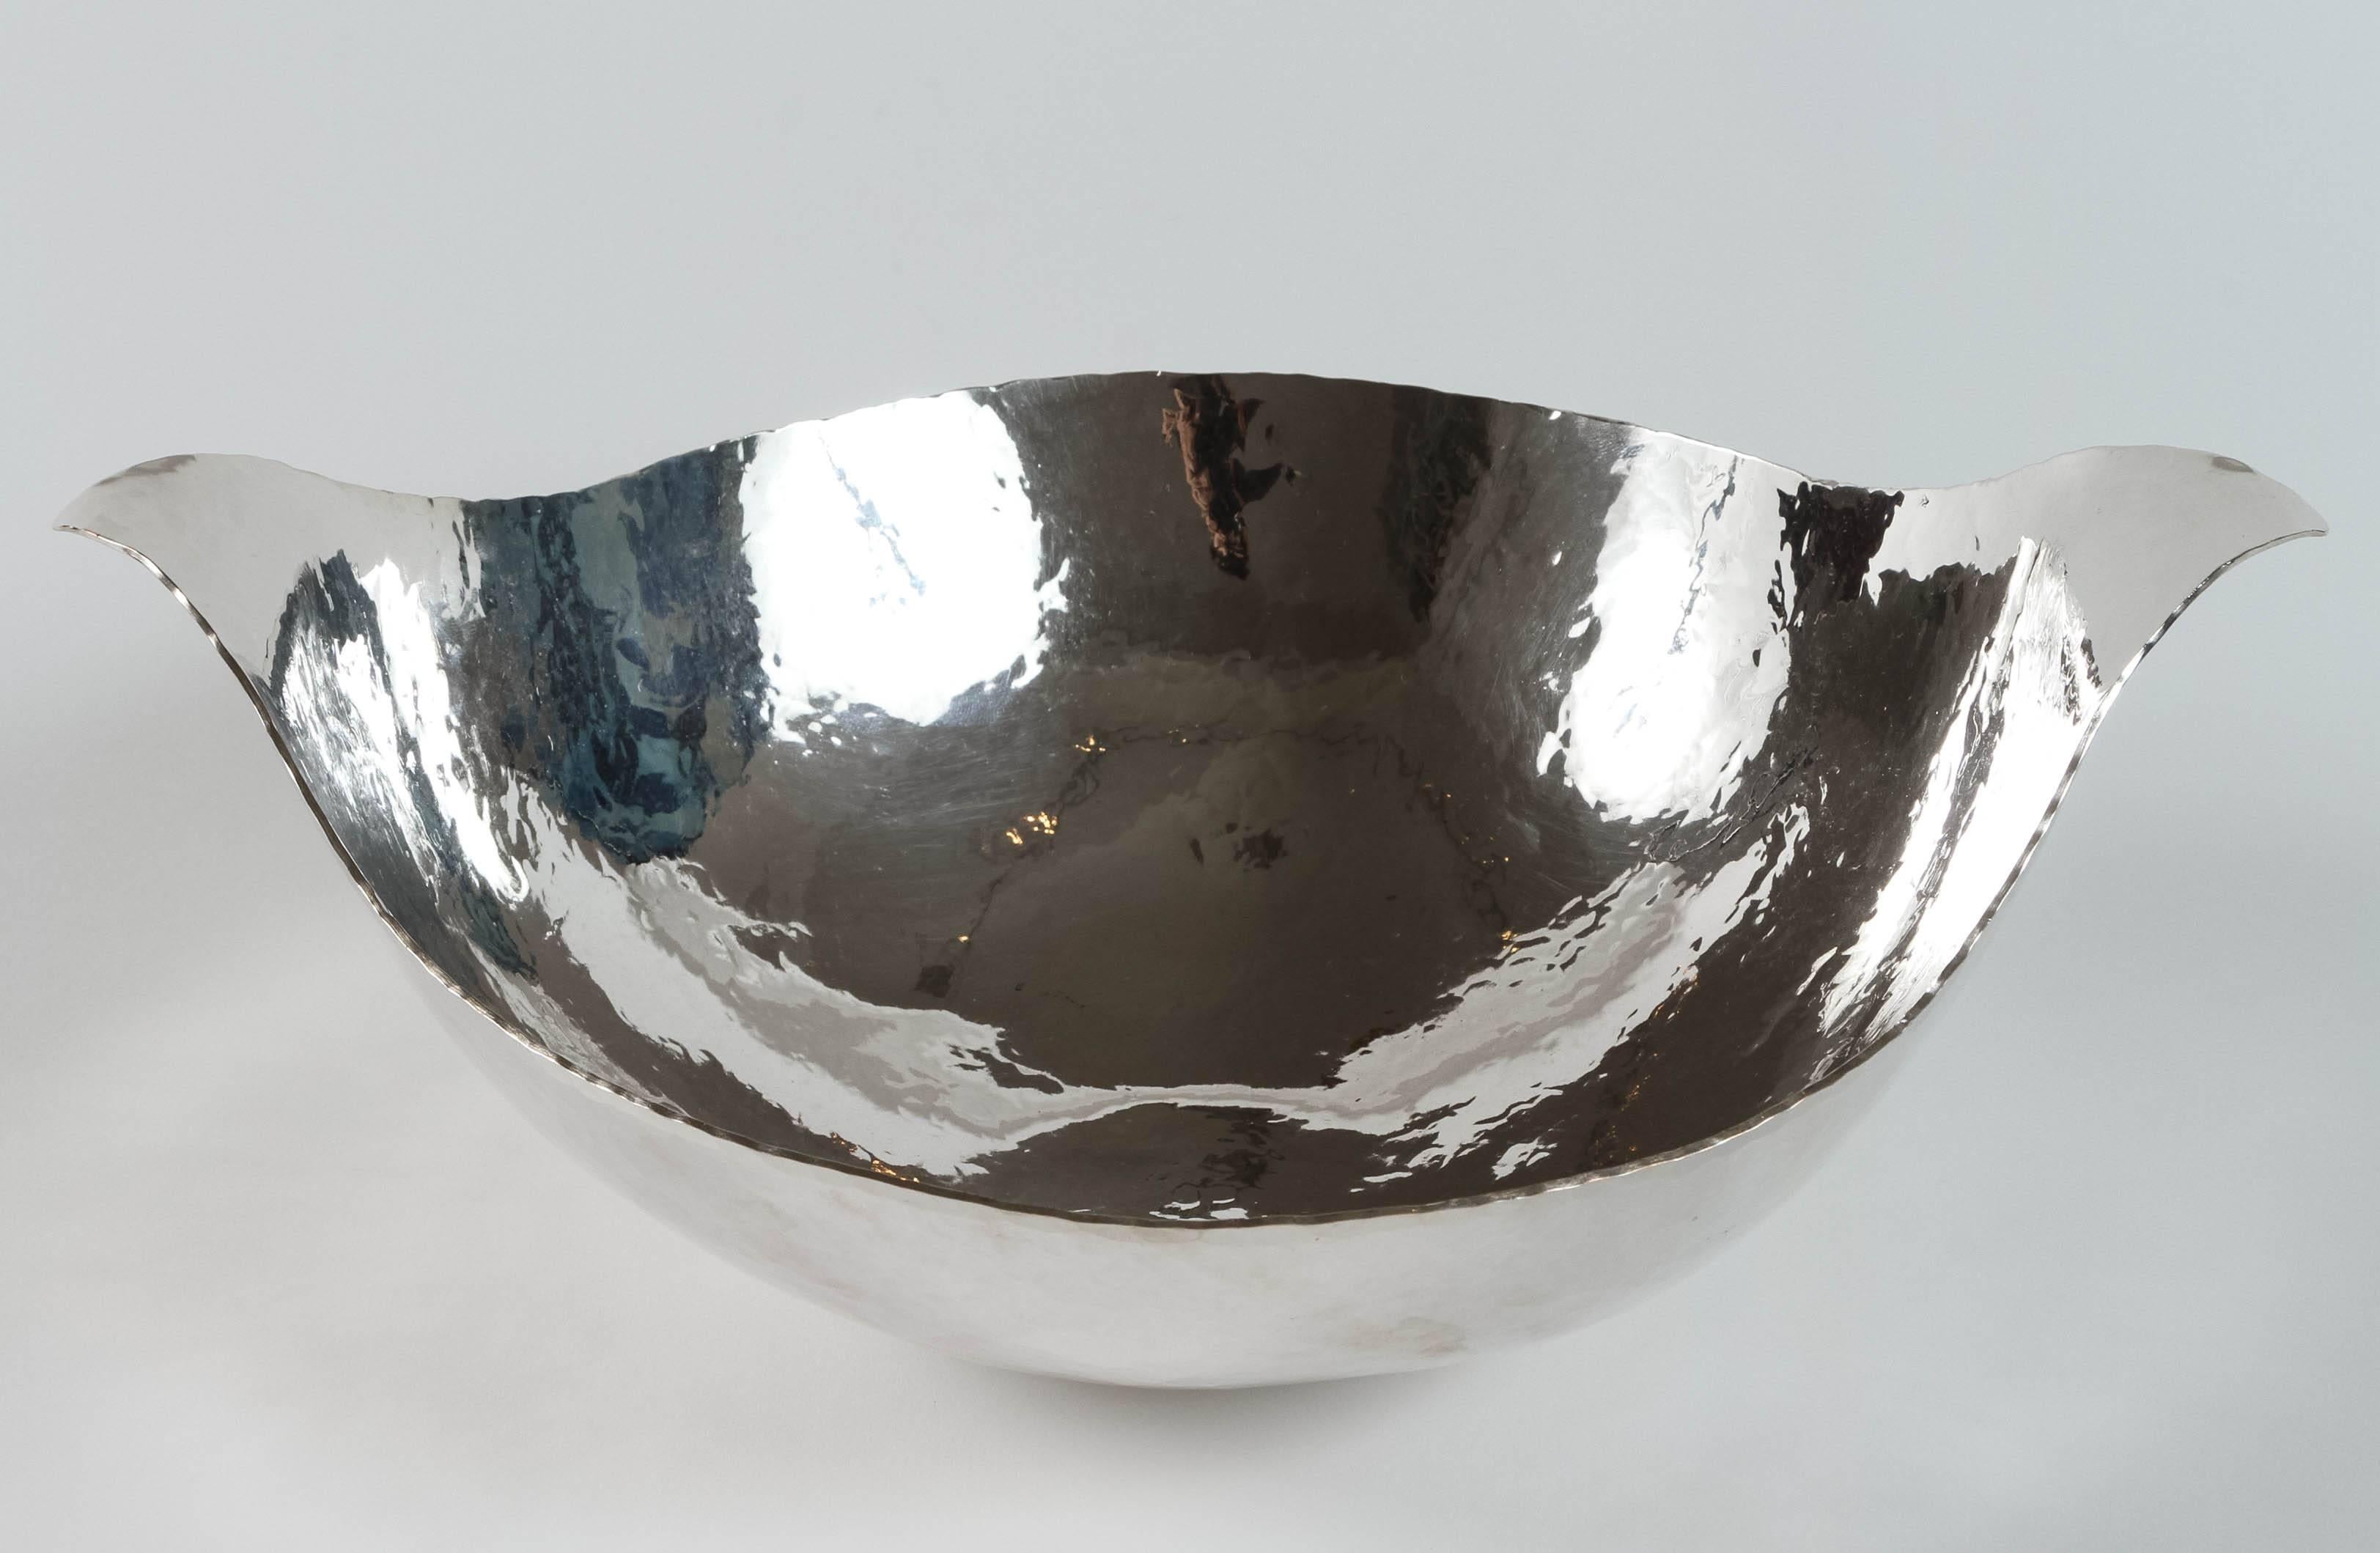 Ben Caldwell creates by hand copper and sterling silver pieces, bowls, trays and sculptures using traditional smithing techniques. The hand-wrought texture covering every surface is a signature of Ben's work.